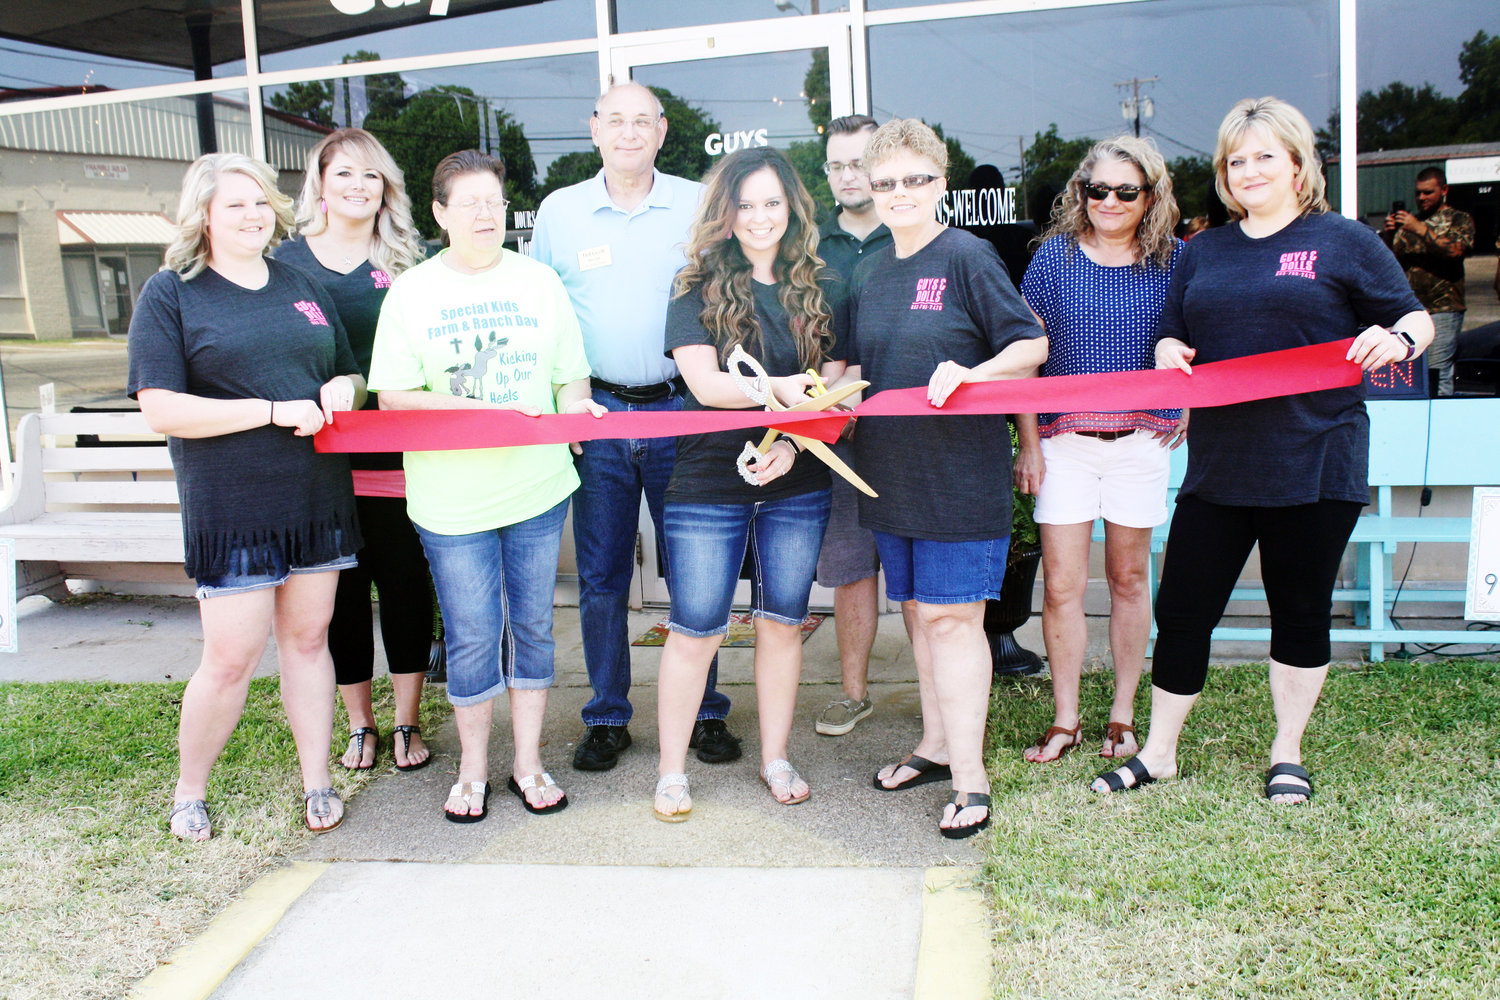 Amber Gaby, owner of Guys and Dolls on the square in Alba, cuts the ribbon celebrating the Grand Opening of the salon.